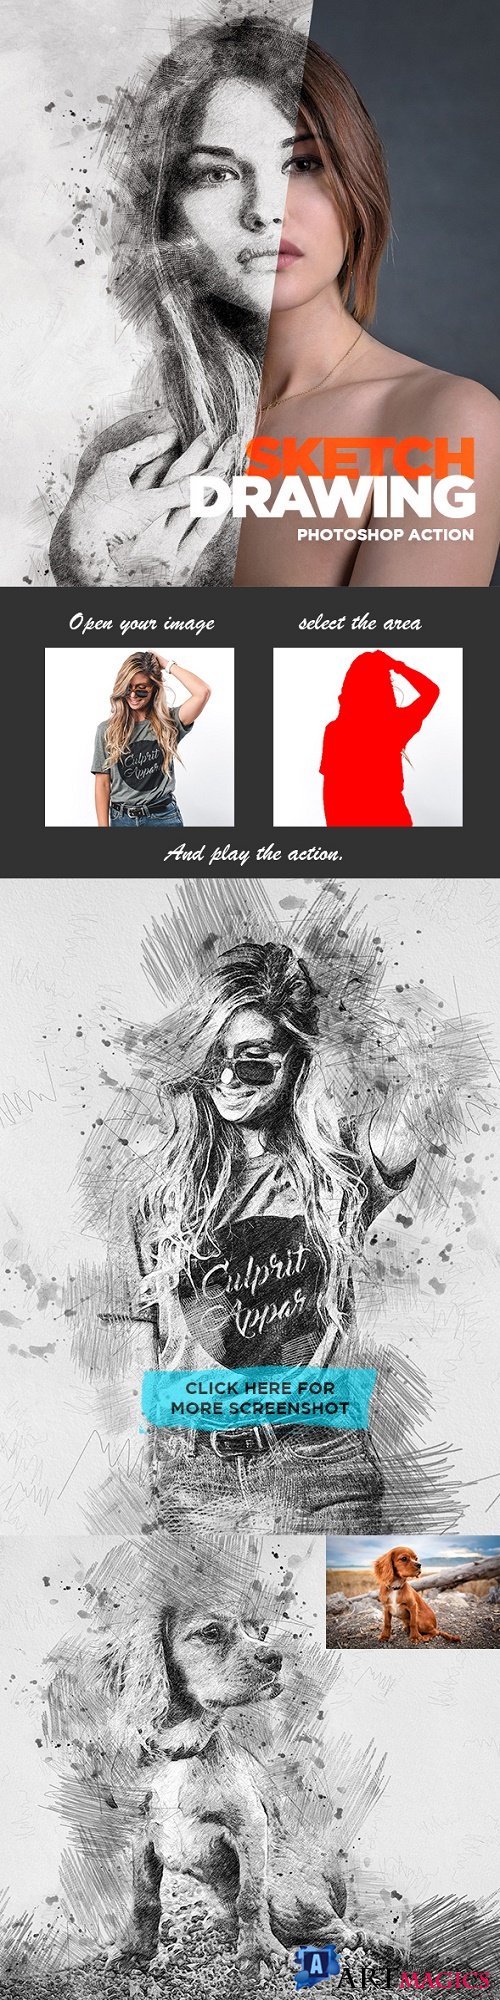 Sketch Drawing - Photoshop Action 22588545